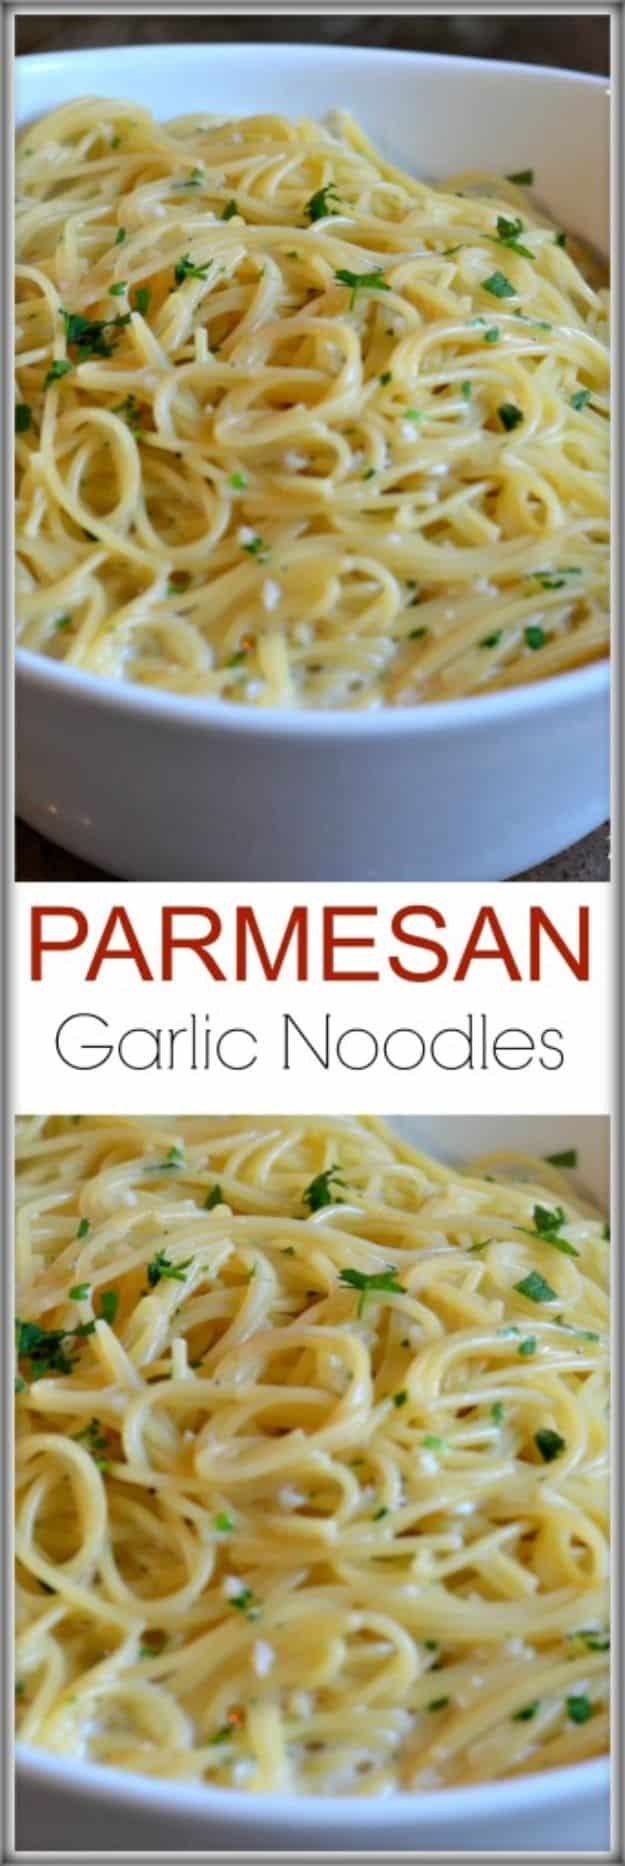 Best Recipes for the Cheese Lover - Parmesan Garlic Noodles - Easy Recipe Ideas With Cheese - Homemade Appetizers, Dips, Dinners, Snacks, Pasta Dishes, Healthy Lunches and Soups Made With Your Favorite Cheeses - Ricotta, Cheddar, Swiss, Parmesan, Goat Chevre, Mozzarella and Feta Ideas - Grilled, Healthy, Vegan and Vegetarian #cheeserecipes #recipes #recipeideas #cheese #cheeserecipe 